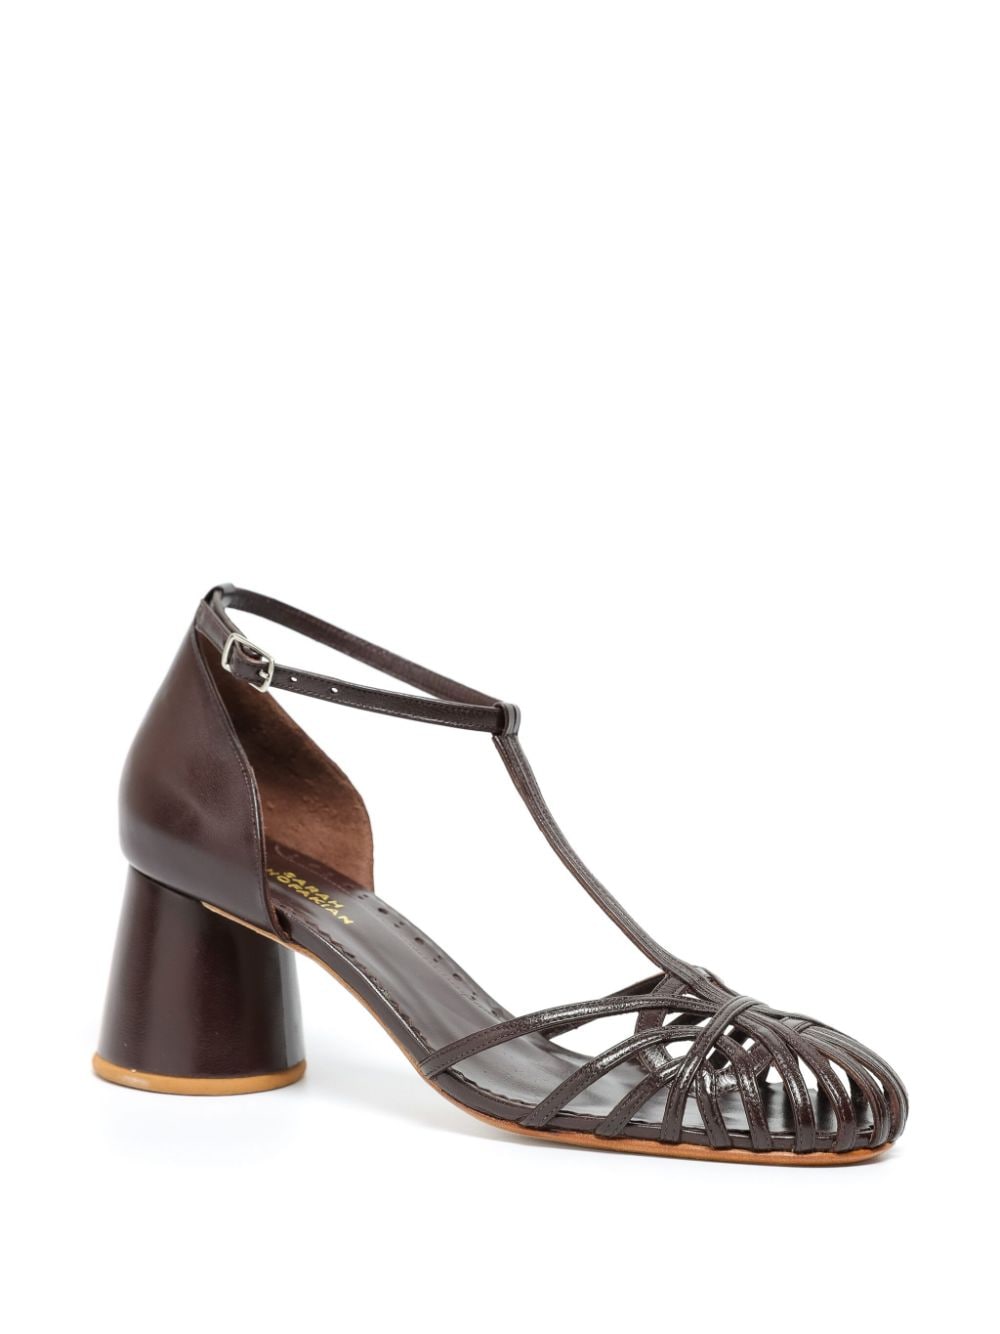 Sarah Chofakian Eugenie 65mm caged leather pumps - Bruin